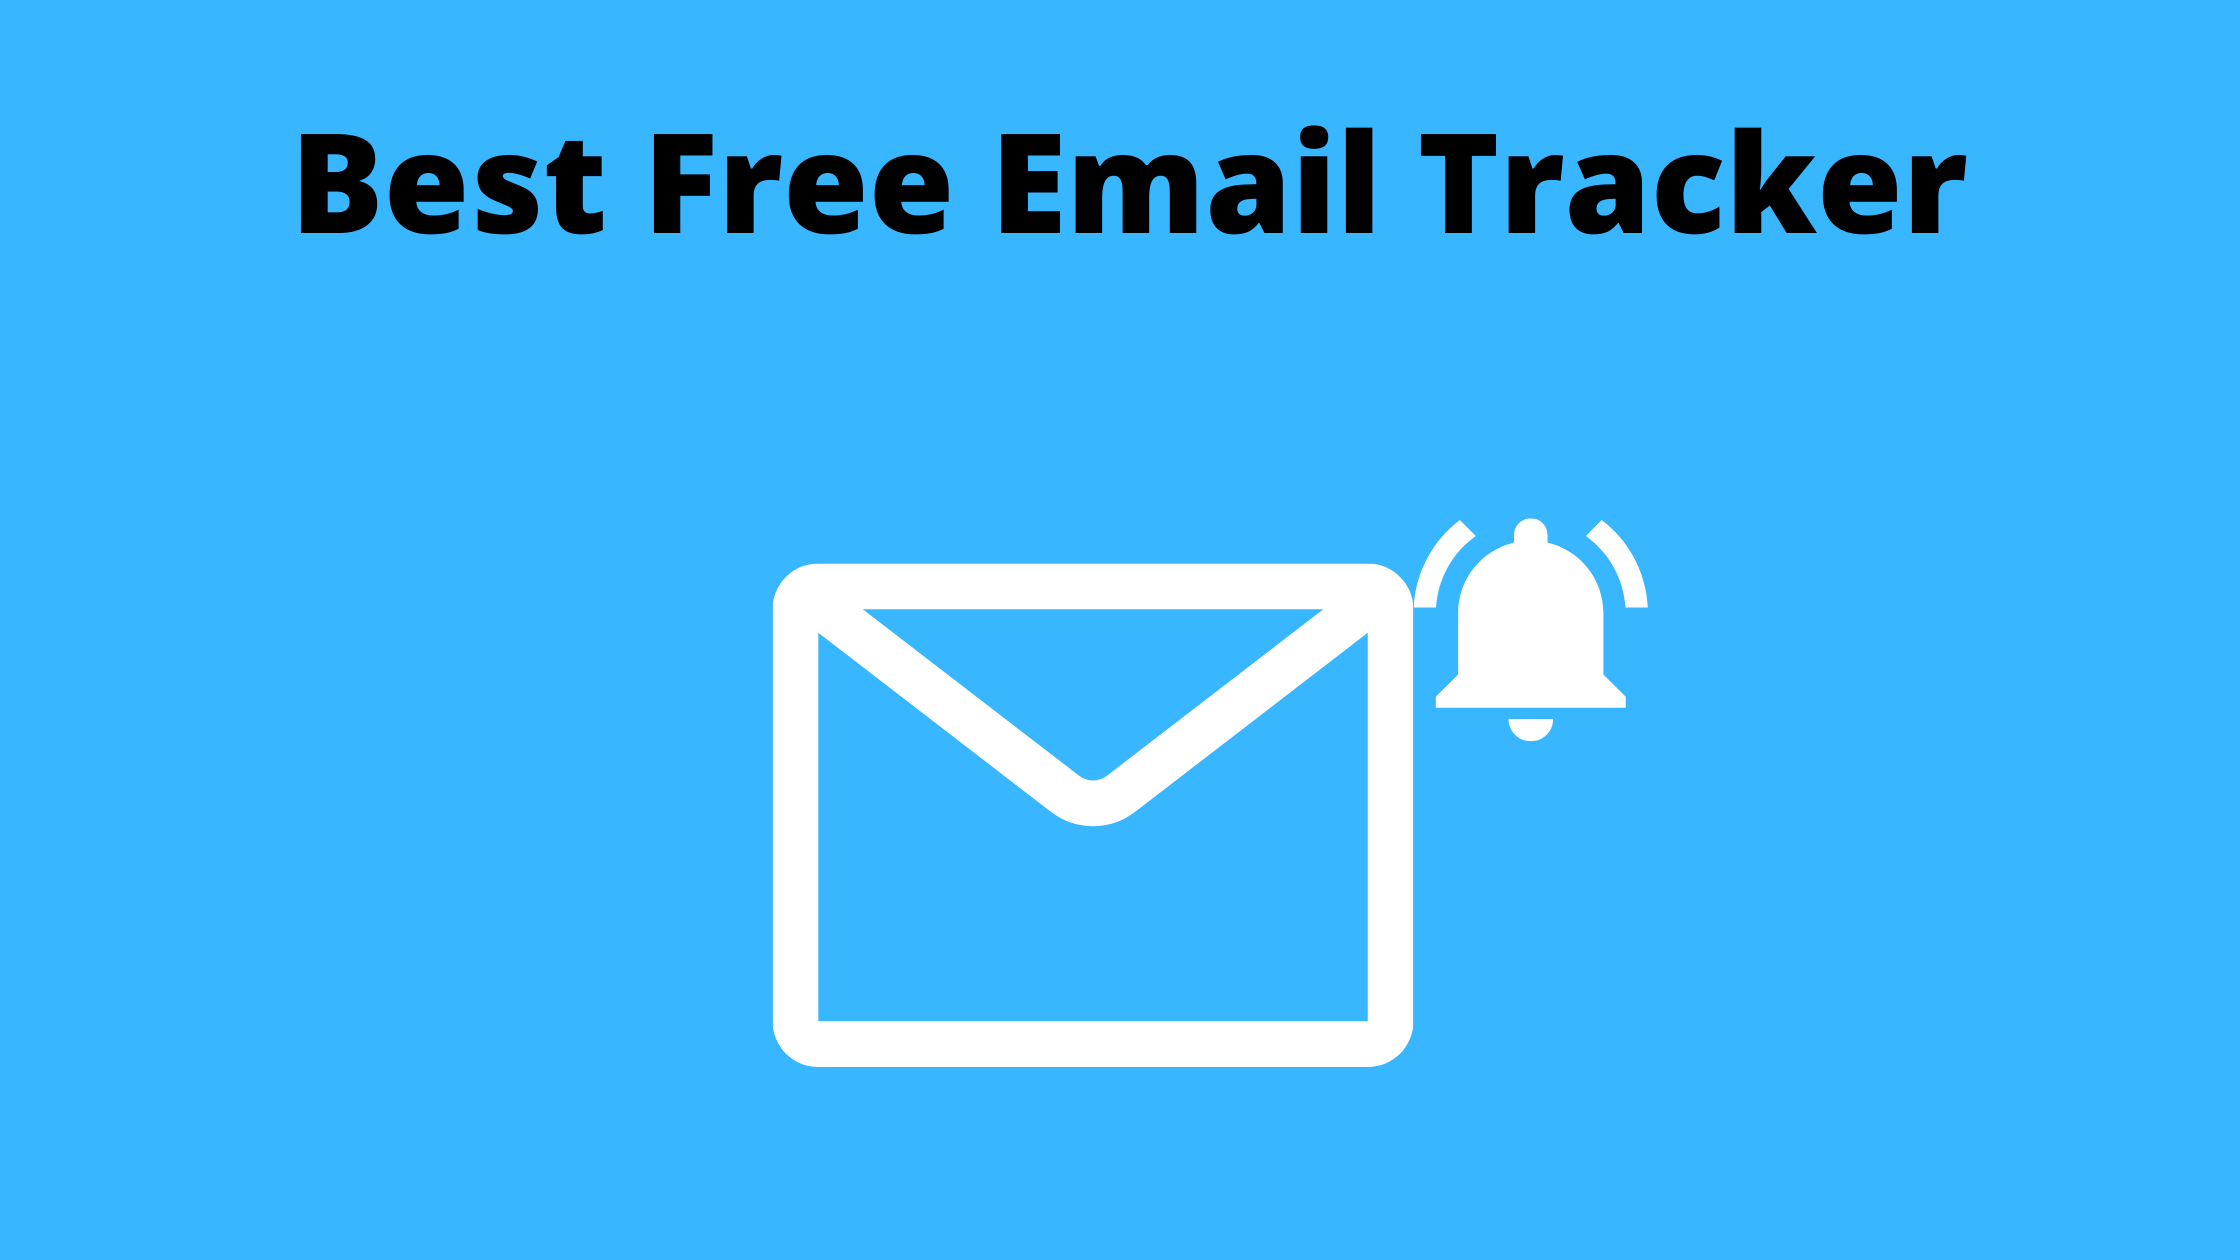 Free Email Tracker